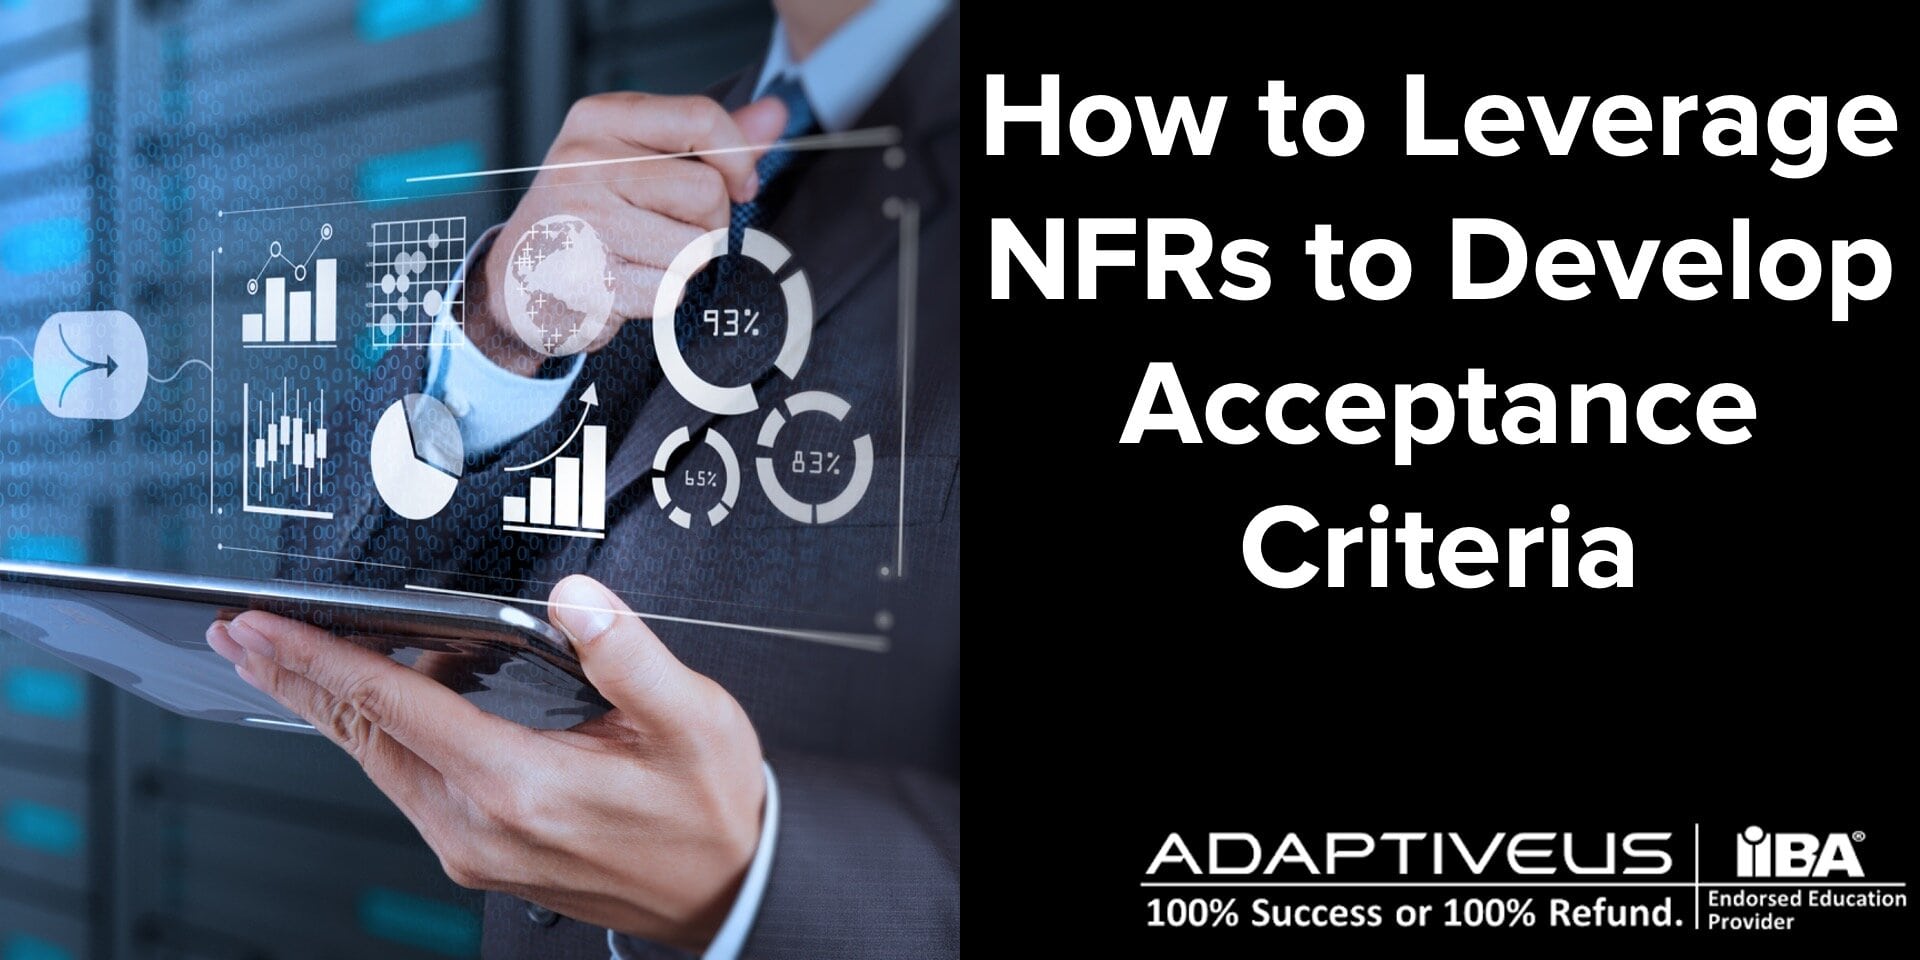 How to Leverage NFRs to Develop Acceptance Criteria